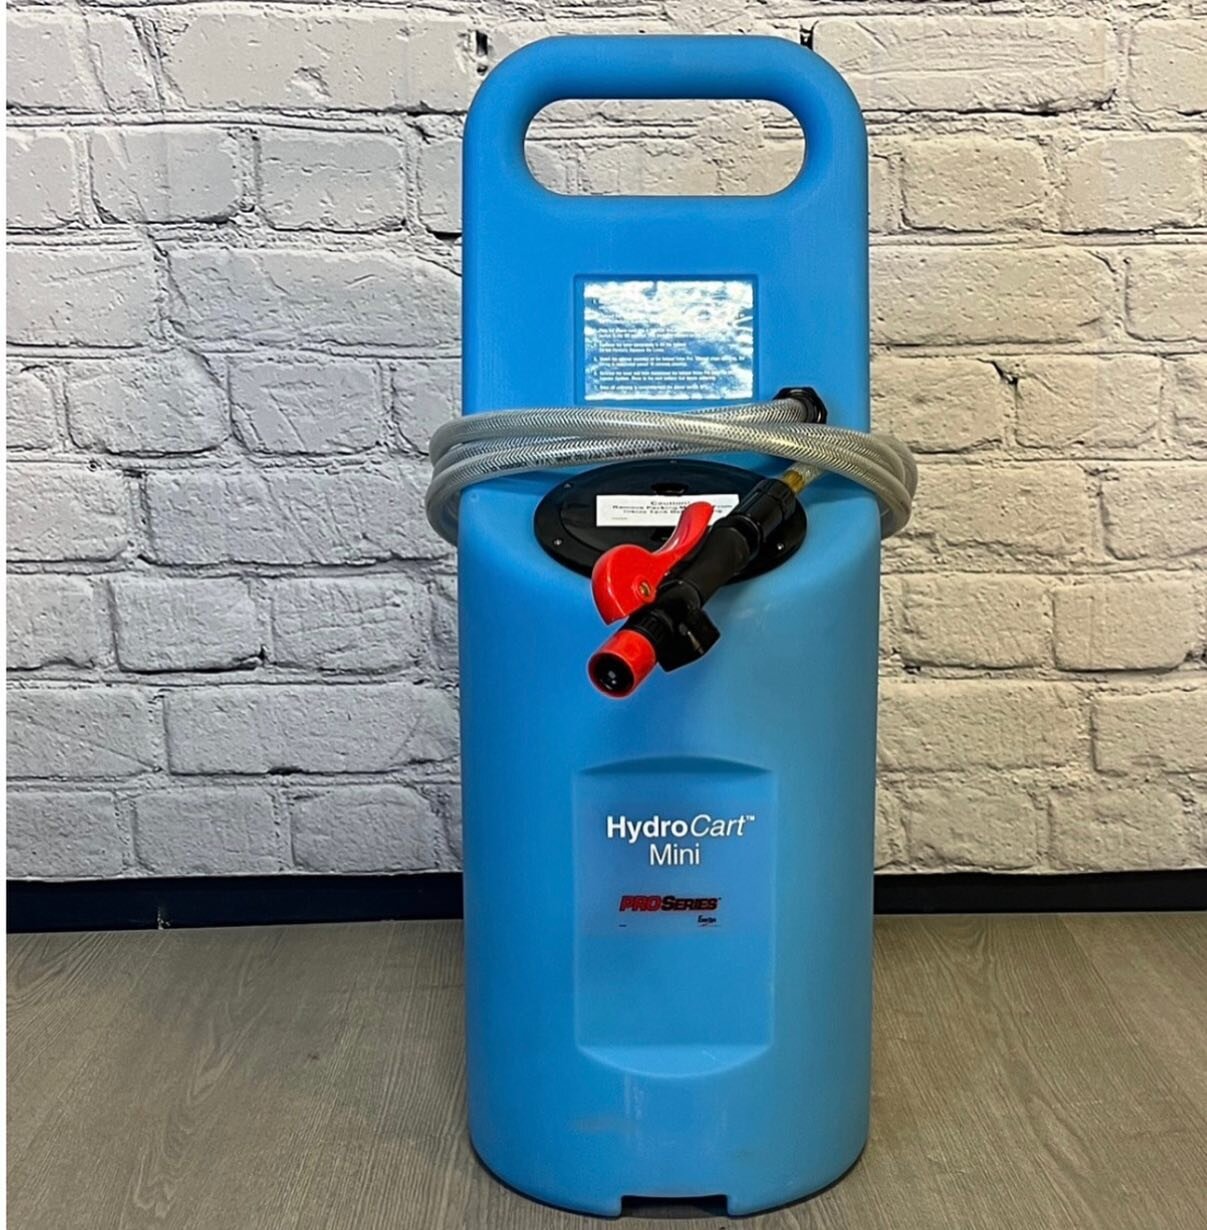 ✨Featured Online Item✨ Hydrocart Mini 10 Gallon Mobile. This item is $450 and only available on the online store! Shop here-https://tacoma-on-line.mybigcommerce.com/hydrocart-mini-10-gallon-mobile/